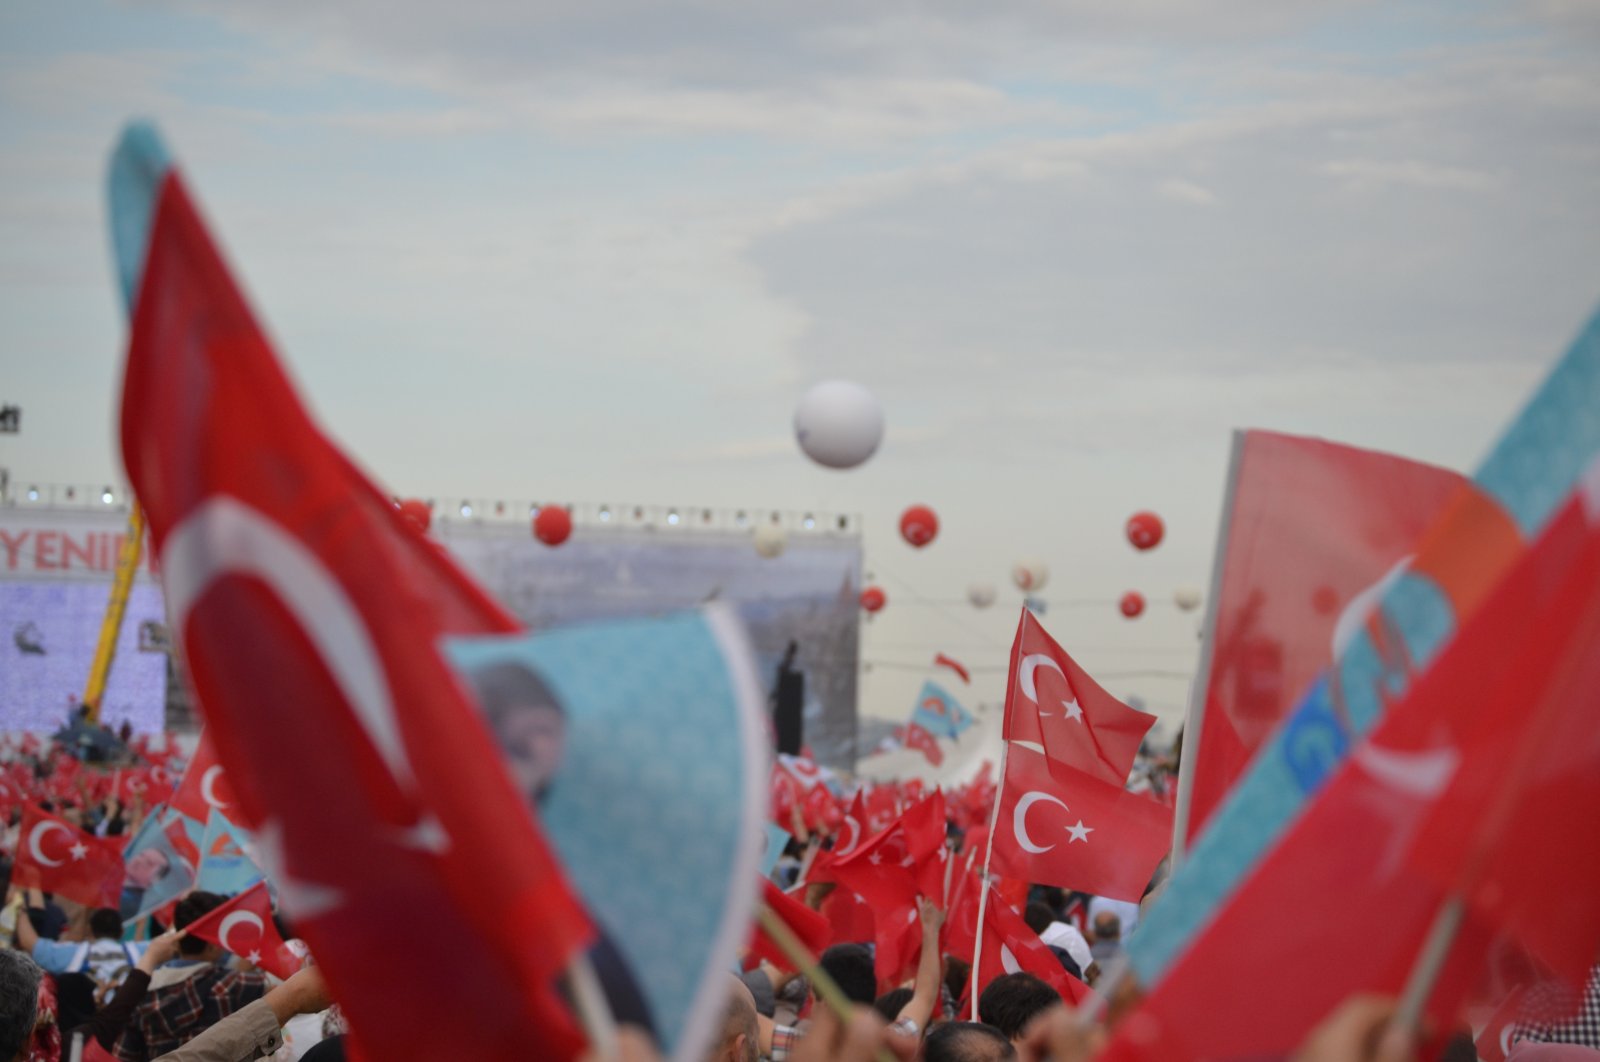 Whereas observers are currently waiting for the Peoples’ Democratic Party (HDP) candidate, everyone knows that President Recep Tayyip Erdoğan and Kemal Kılıçdaroğlu, the Republican People’s Party (CHP) chair, will be the top contenders in the presidential race. (Shutterstock Photo)